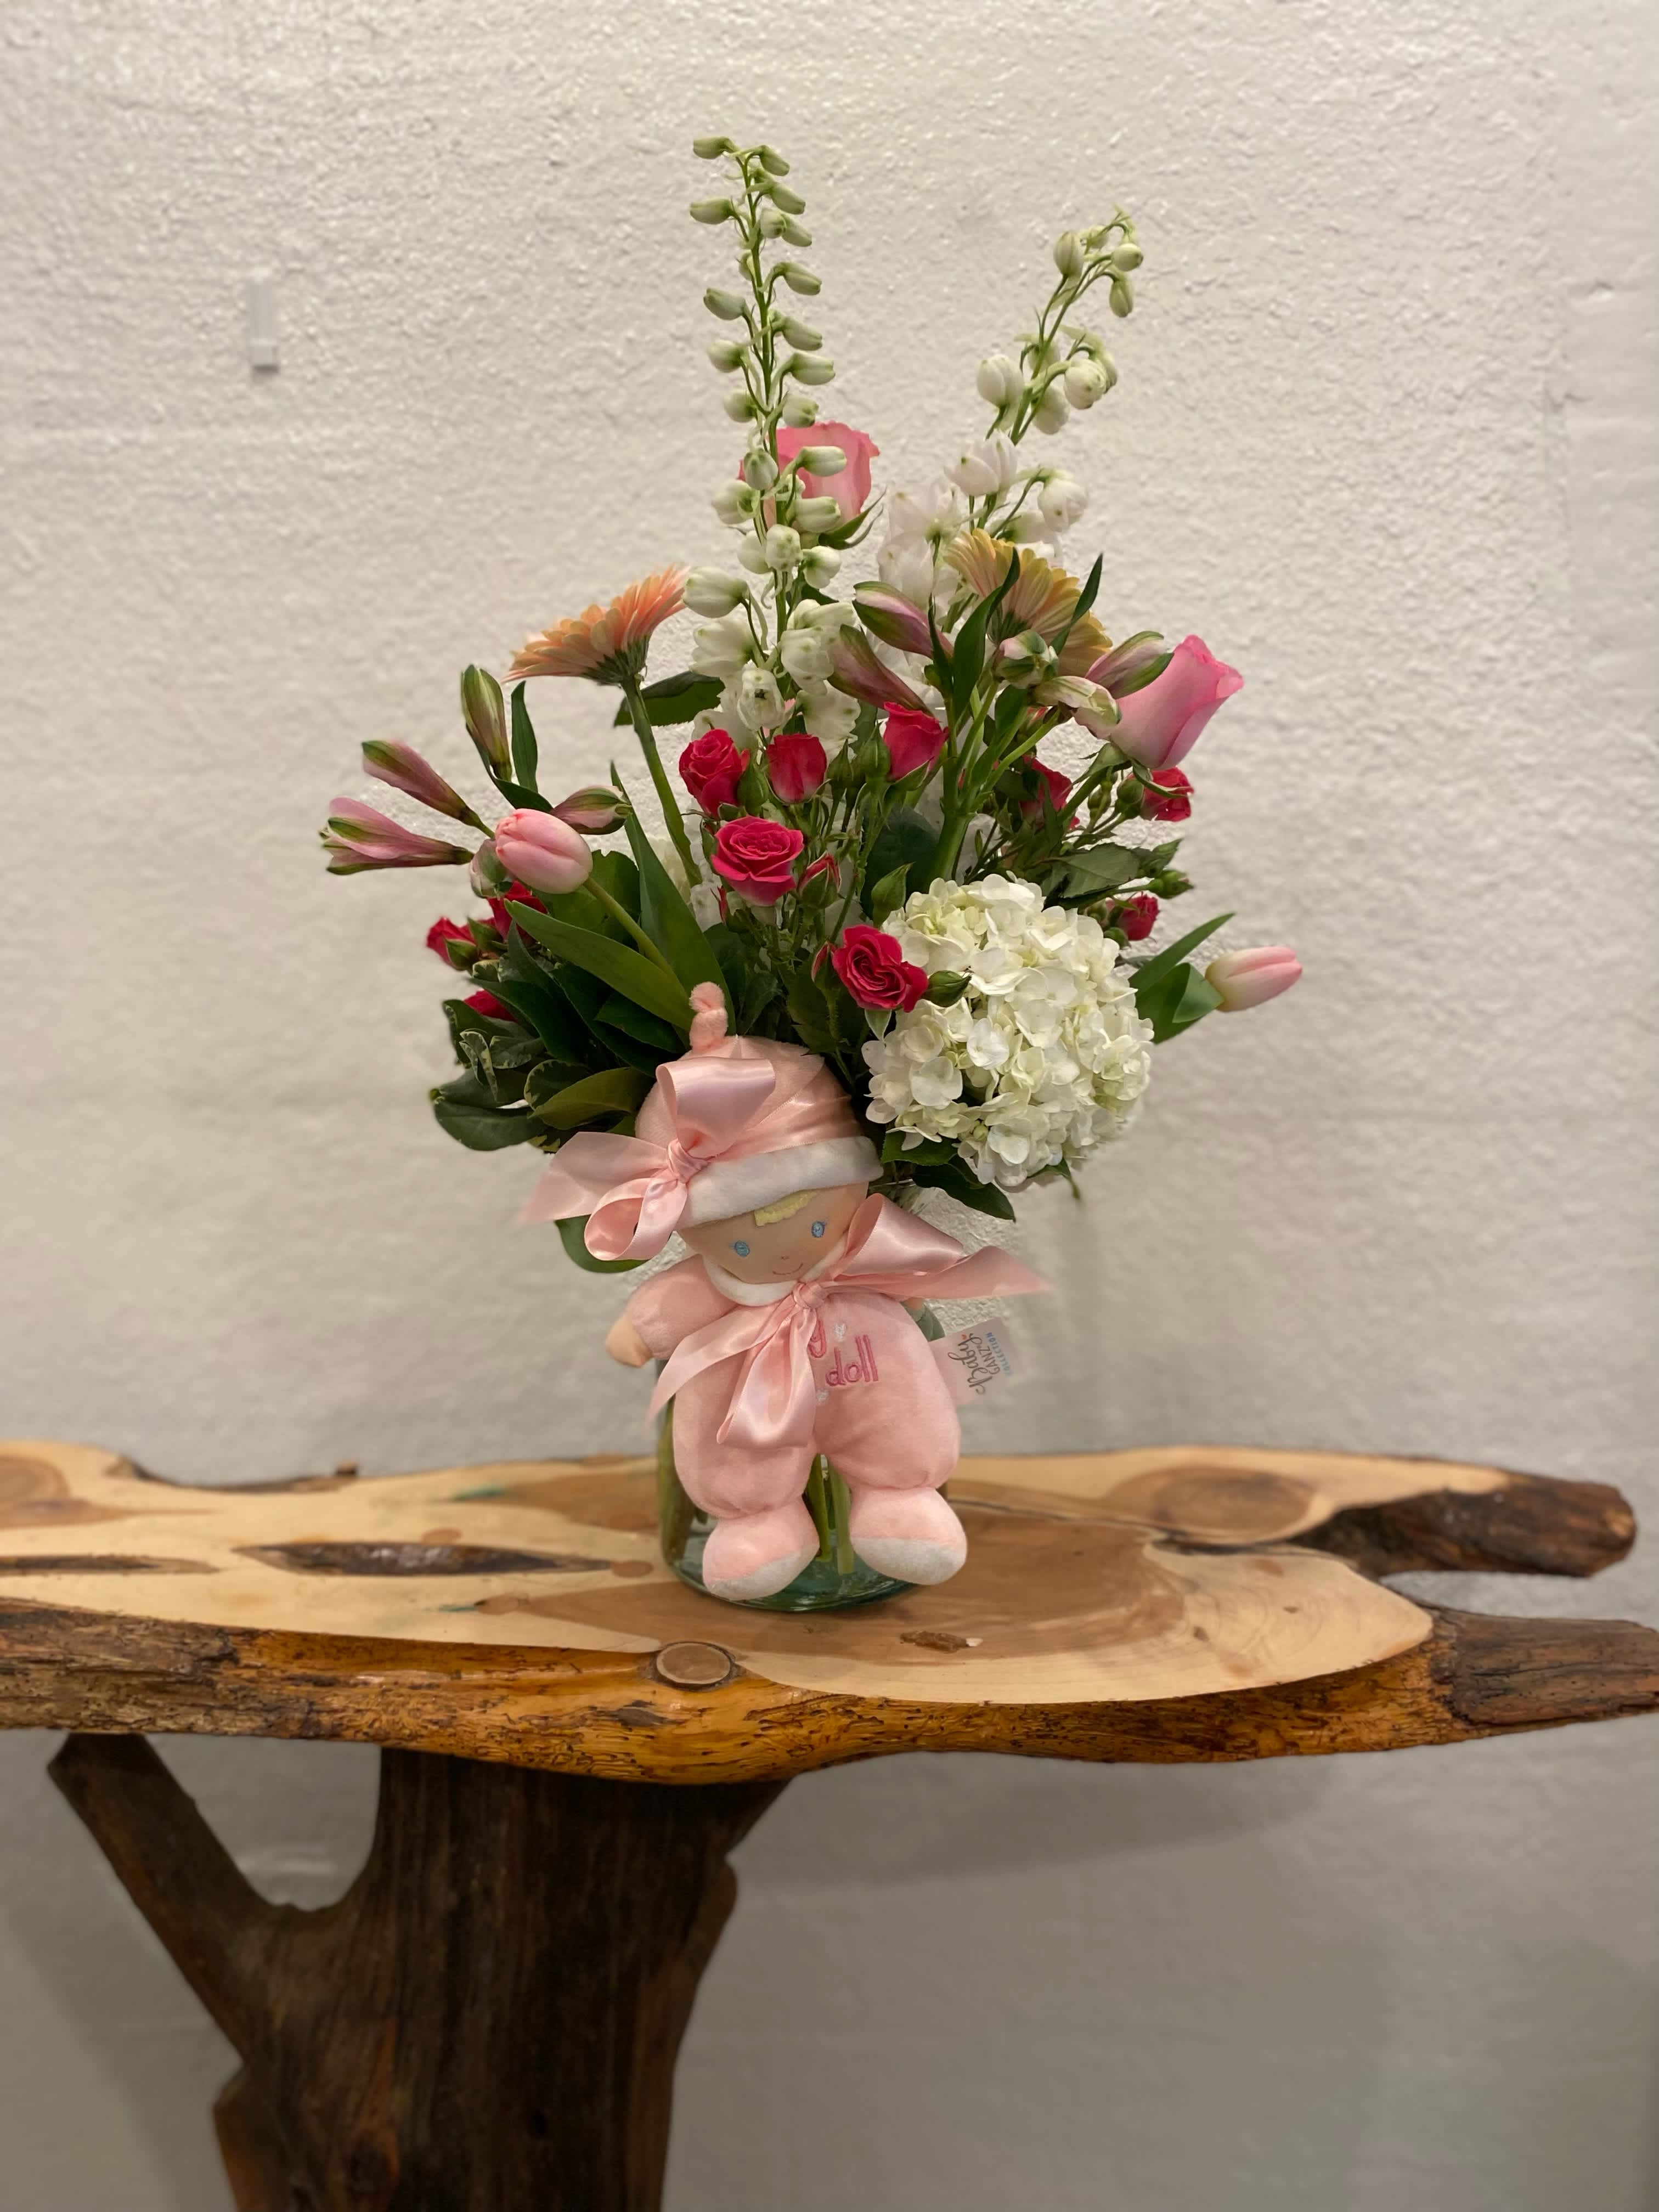 Lovely Baby Girl - Send this beautiful arrangement of pink and white flowers with an adorable pink plush for that new baby in your life.